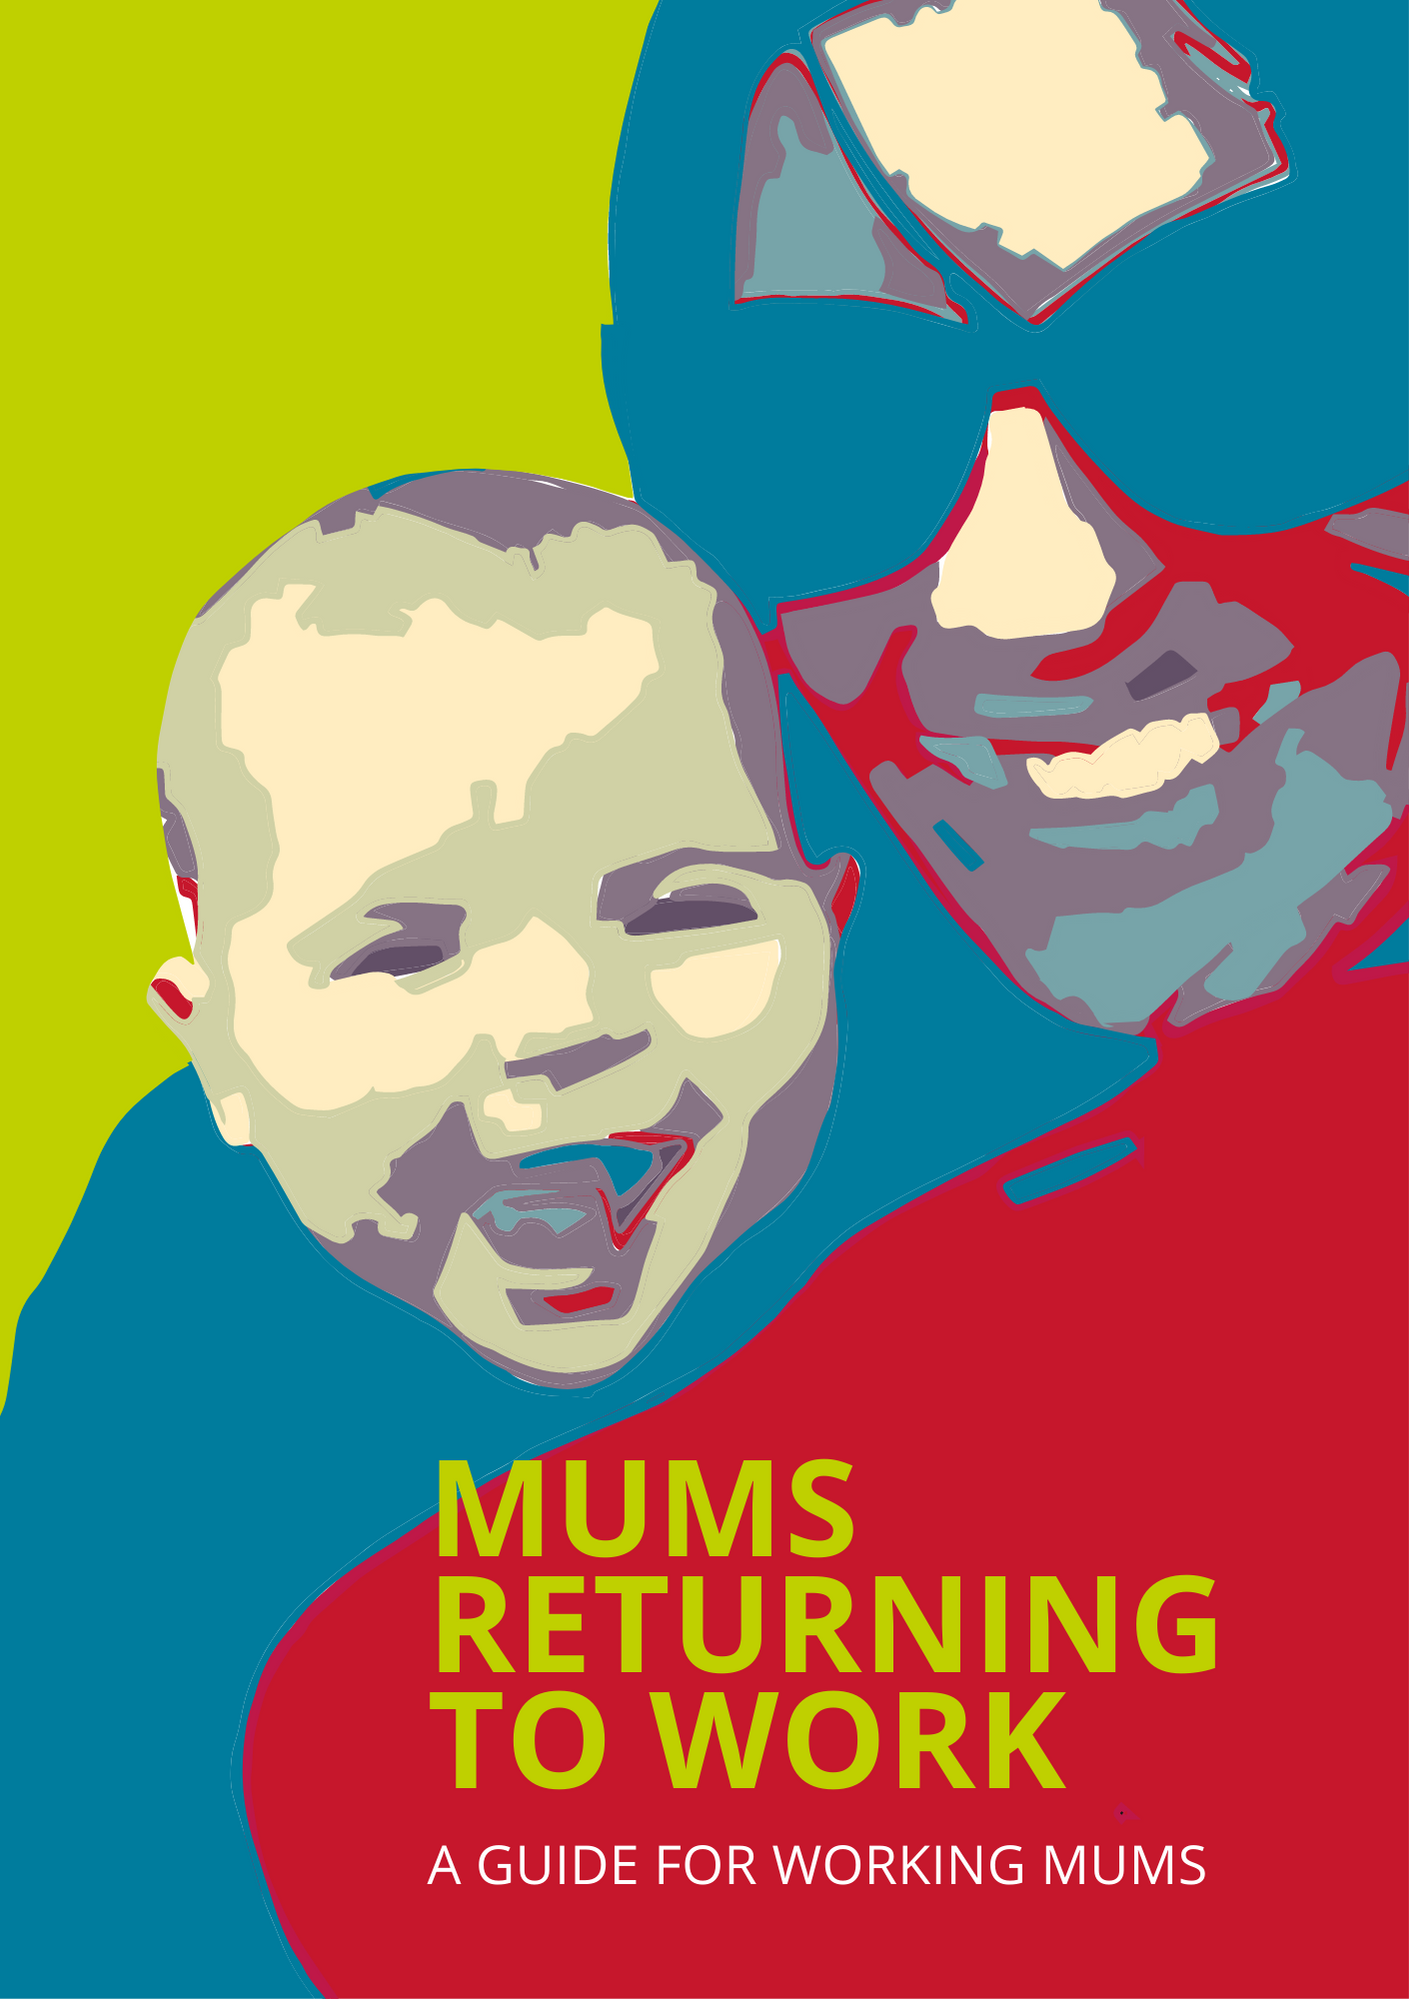 Mums returning to work - a guide for working mums